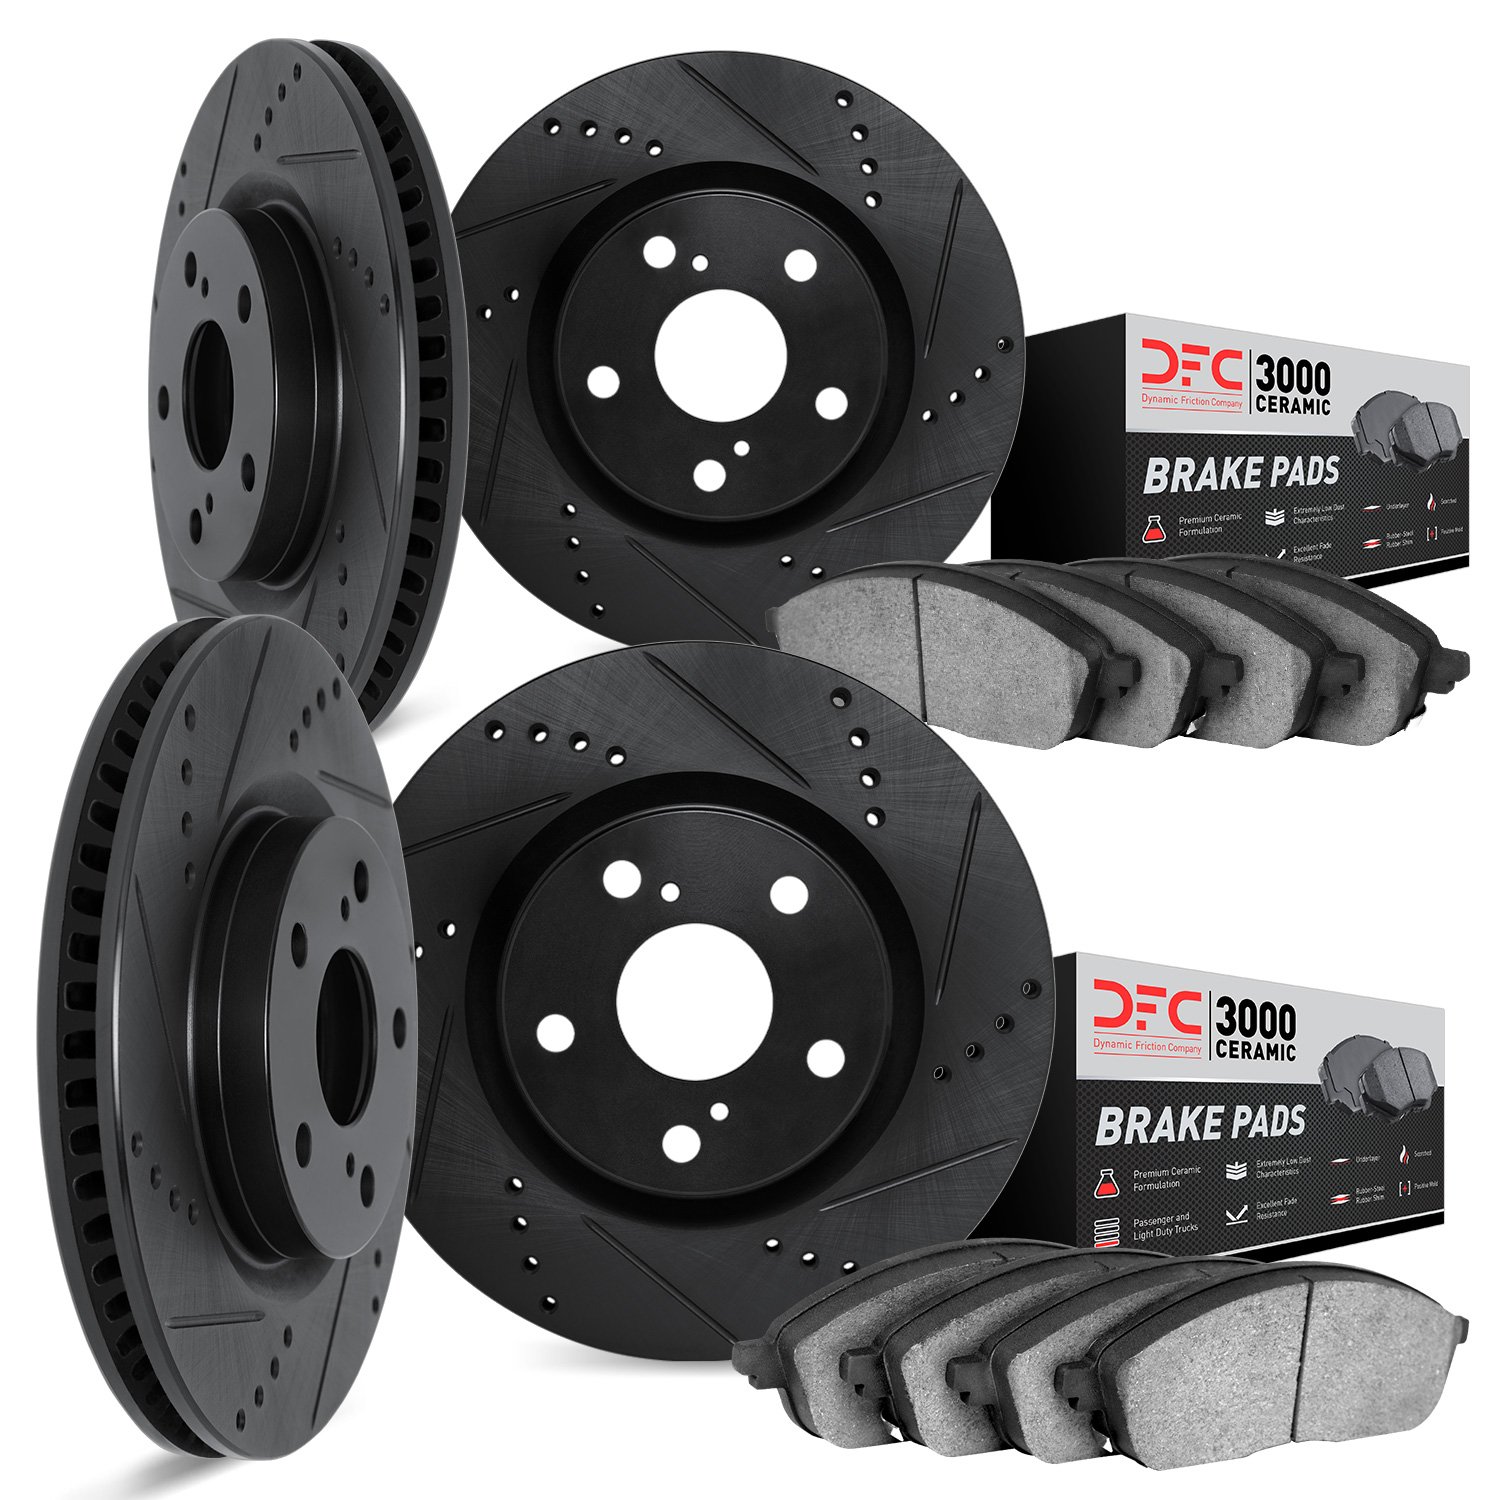 8304-72028 Drilled/Slotted Brake Rotors with 3000-Series Ceramic Brake Pads Kit [Black], 1994-1994 Mopar, Position: Front and Re